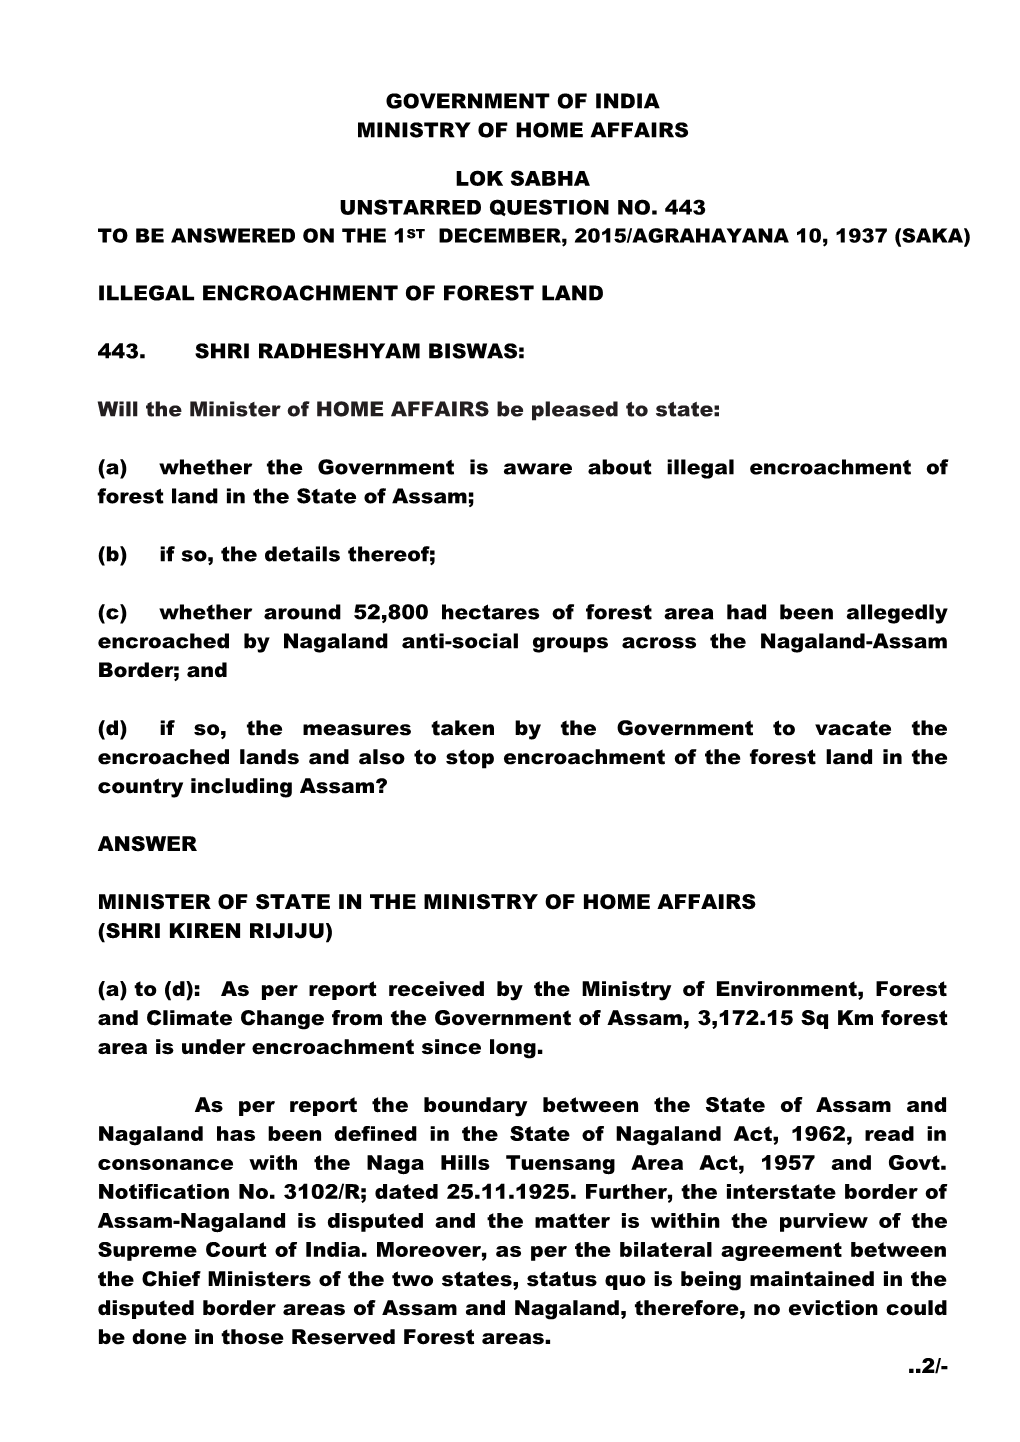 Government of India Ministry of Home Affairs Lok Sabha Unstarred Question No. 443 Illegal Encroachment of Forest Land 443. Shri